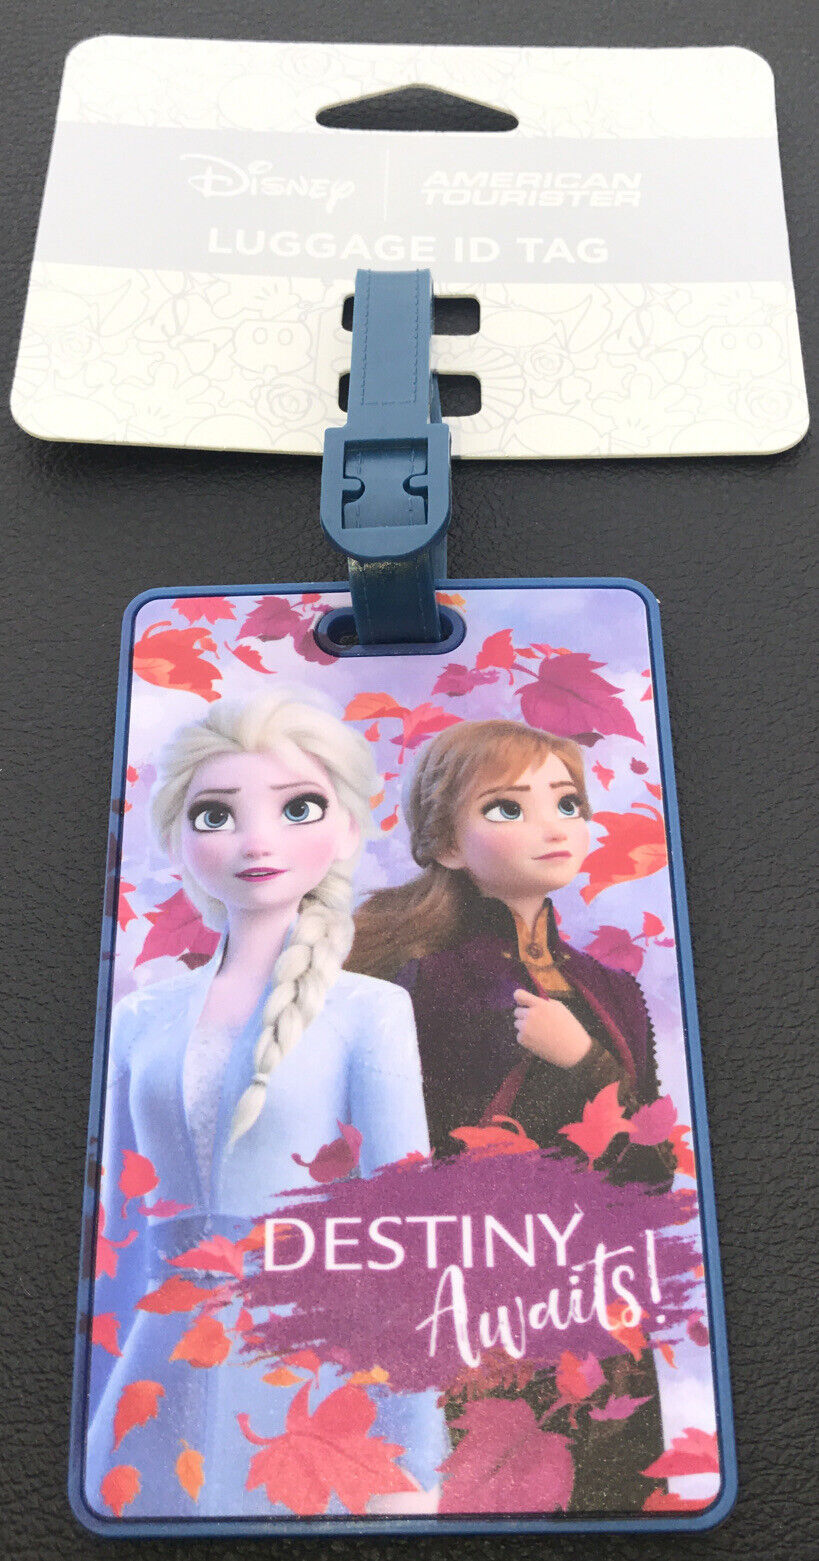 Disney Frozen Elsa & Anna All items in the store Luggage Awaits Tag Max 80% OFF -American - Destiny